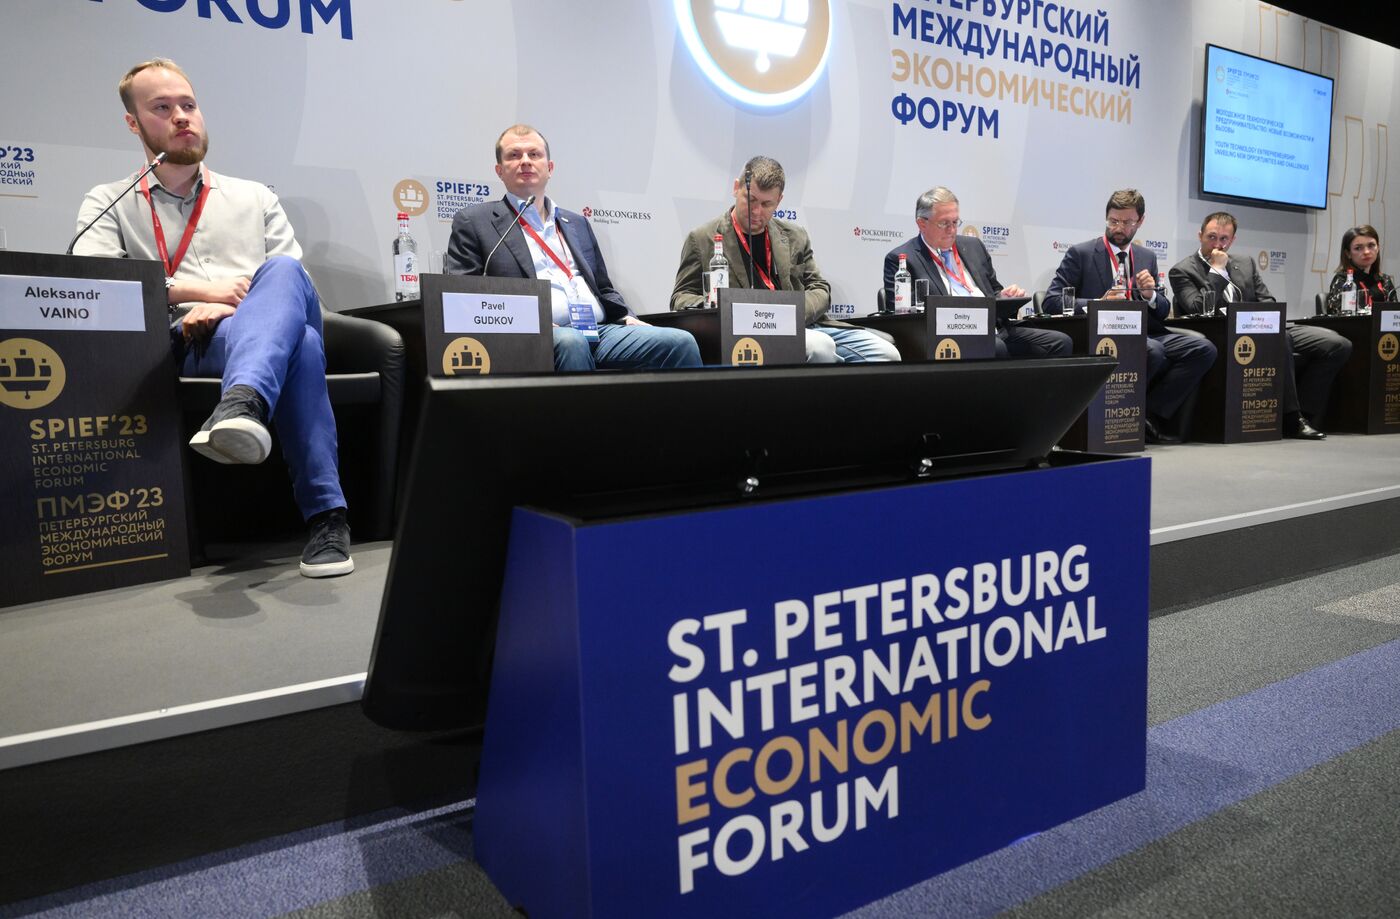 SPIEF-2023. Youth Technology Entrepreneurship: Unveiling New Opportunities and Challenges